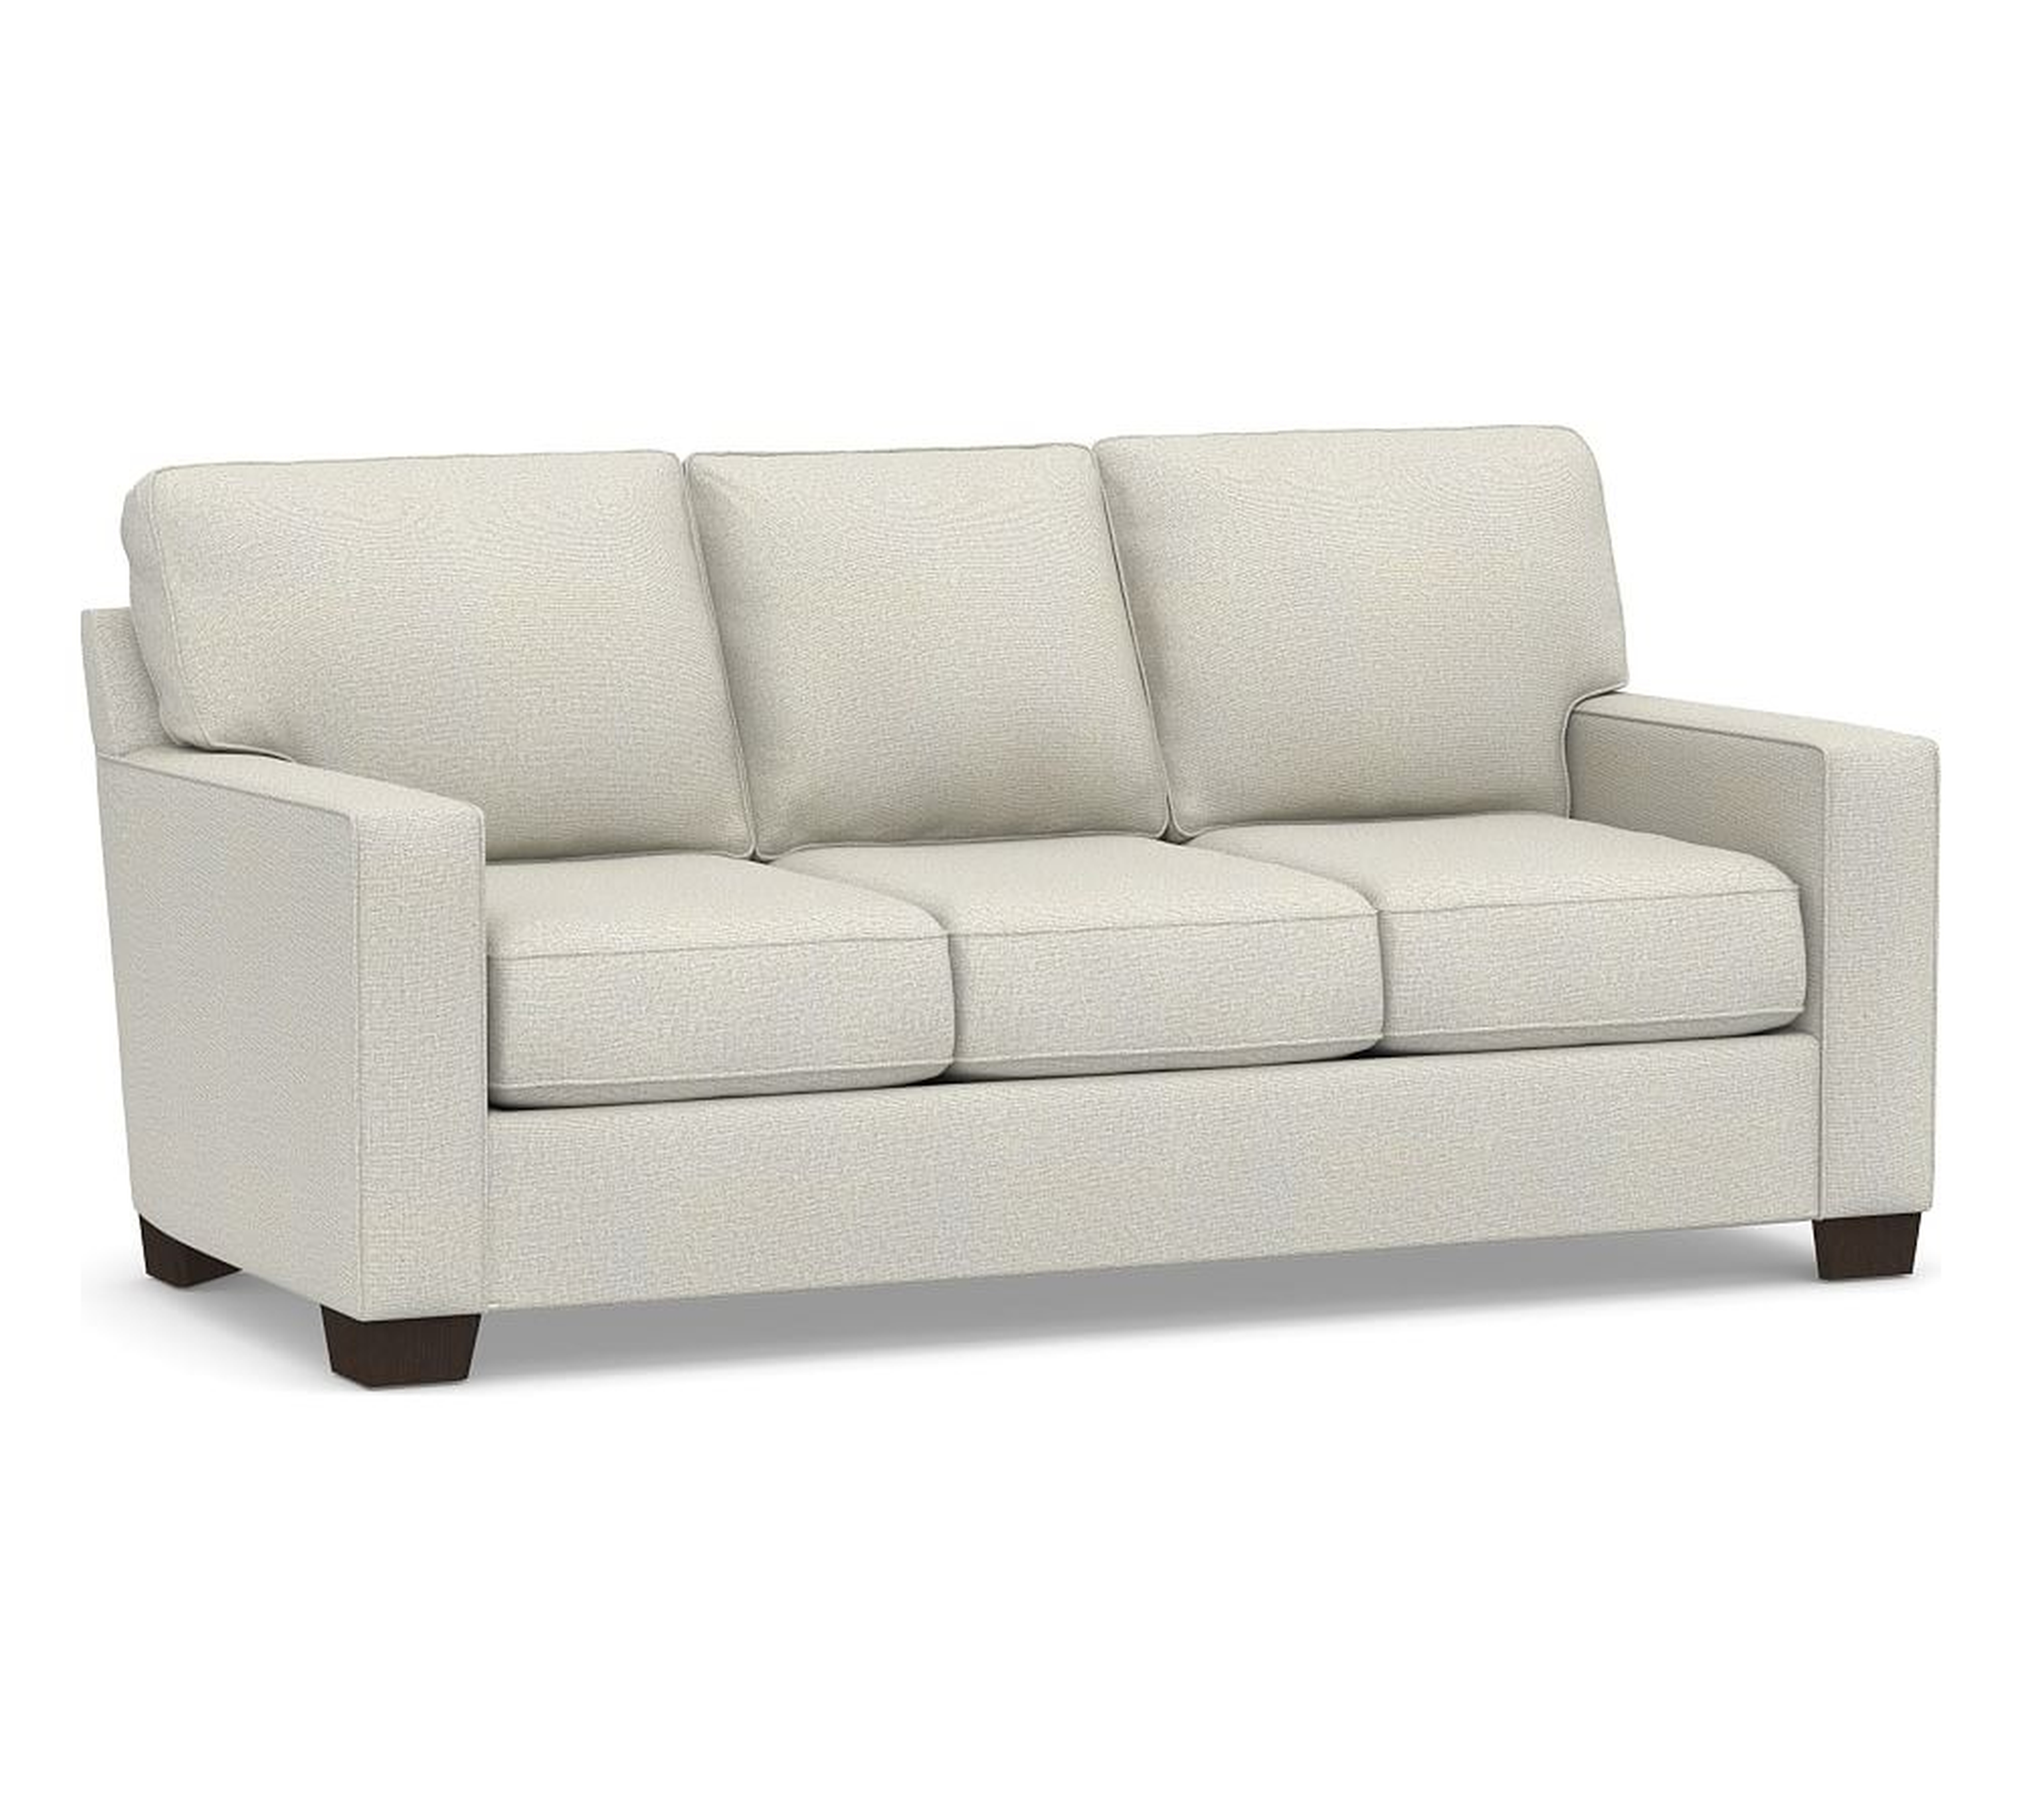 Buchanan Square Arm Upholstered Sofa 83.5", Polyester Wrapped Cushions, Performance Heathered Basketweave Dove - Pottery Barn